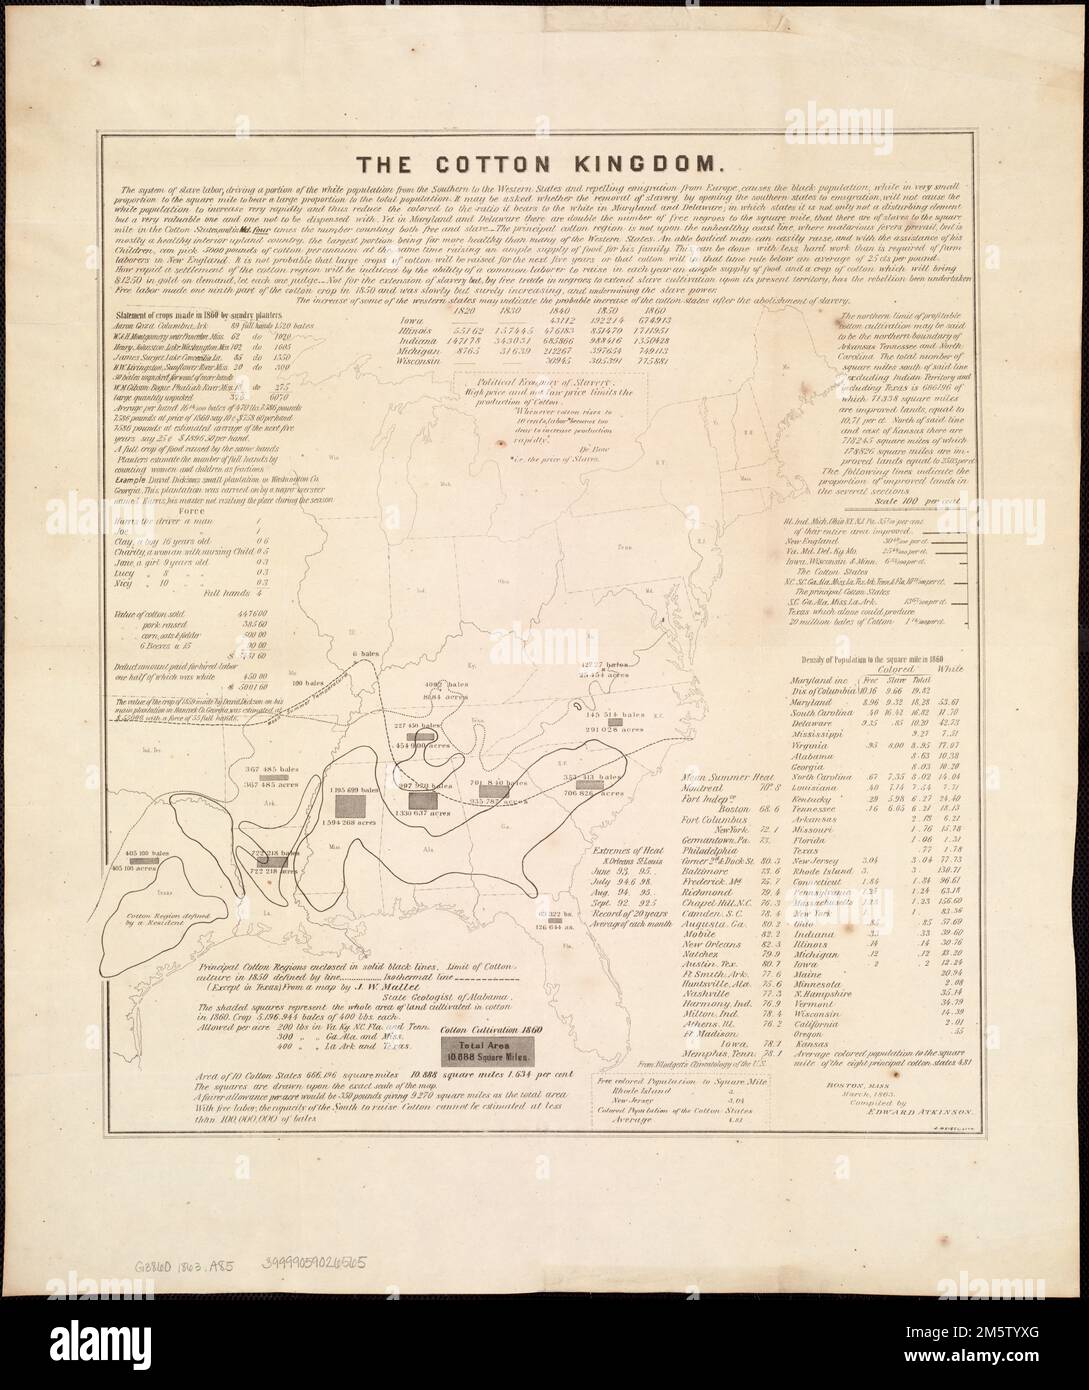 The cotton kingdom. Includes map and statistics relating to crops, temperature, population, etc. 'Boston, Mass[.] March, 1863. Compiled by Edward Atkinson.'. During the antebellum period, cotton was considered “king“ in the South, as it was the region’s predominant cash crop. Cotton cultivation began in coastal South Carolina, but with the invention of the cotton gin in 1793, spread rapidly as far west as Texas. Requiring fertile soil and an extensive growing season, there was a northern geographic limit to cotton cultivation. This boundary is suggested by the “mean summer temperature“ line on Stock Photo